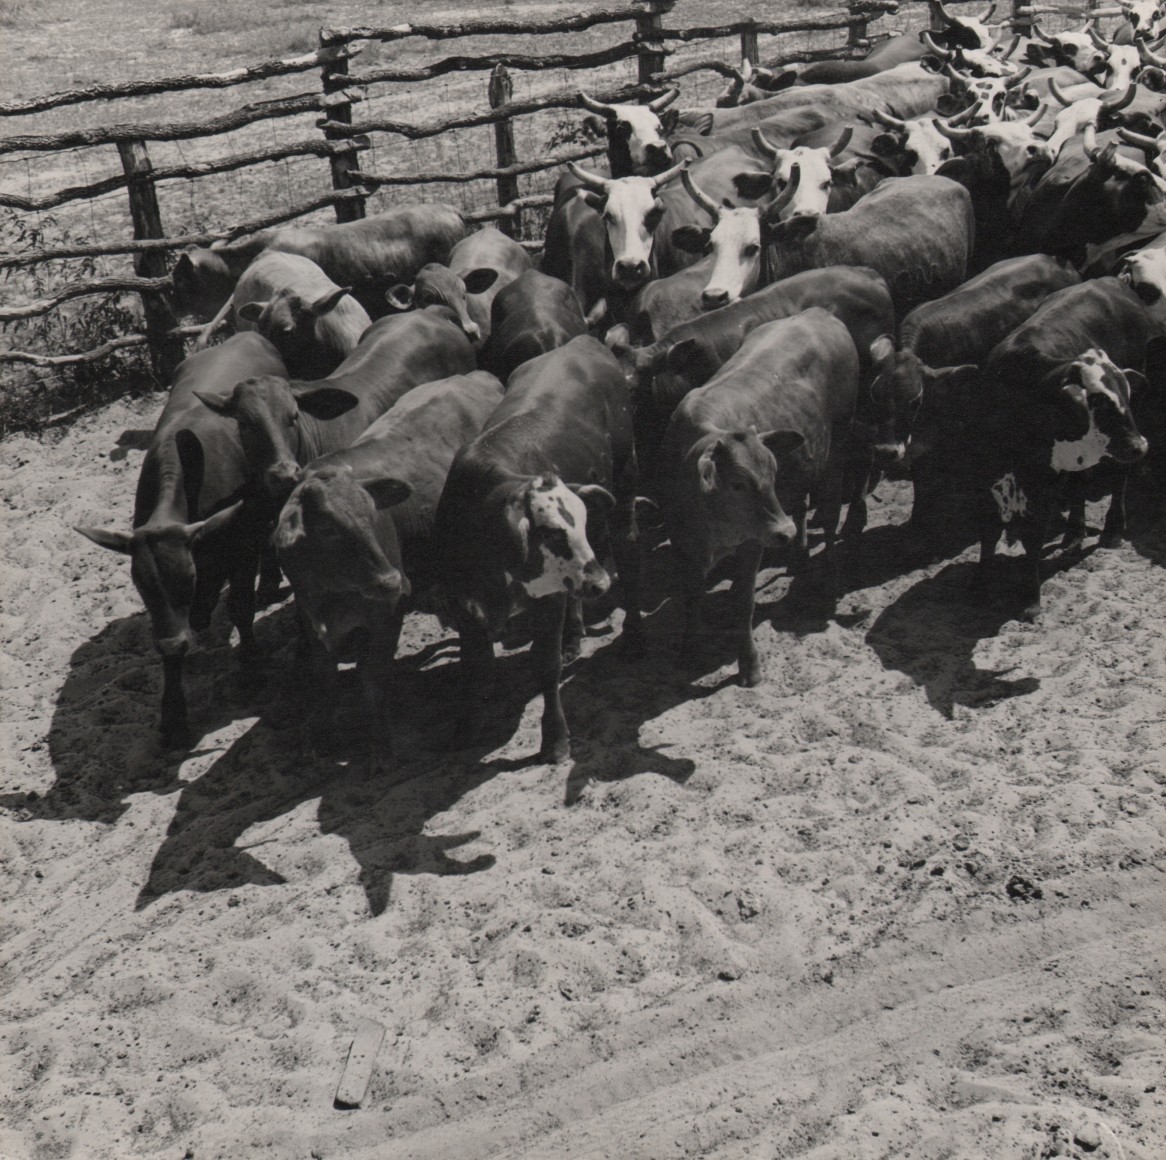 46. Toni Frissell, The King Ranch, 1939&ndash;1944. A herd of cattle in front of a wooden fence photographed from above.